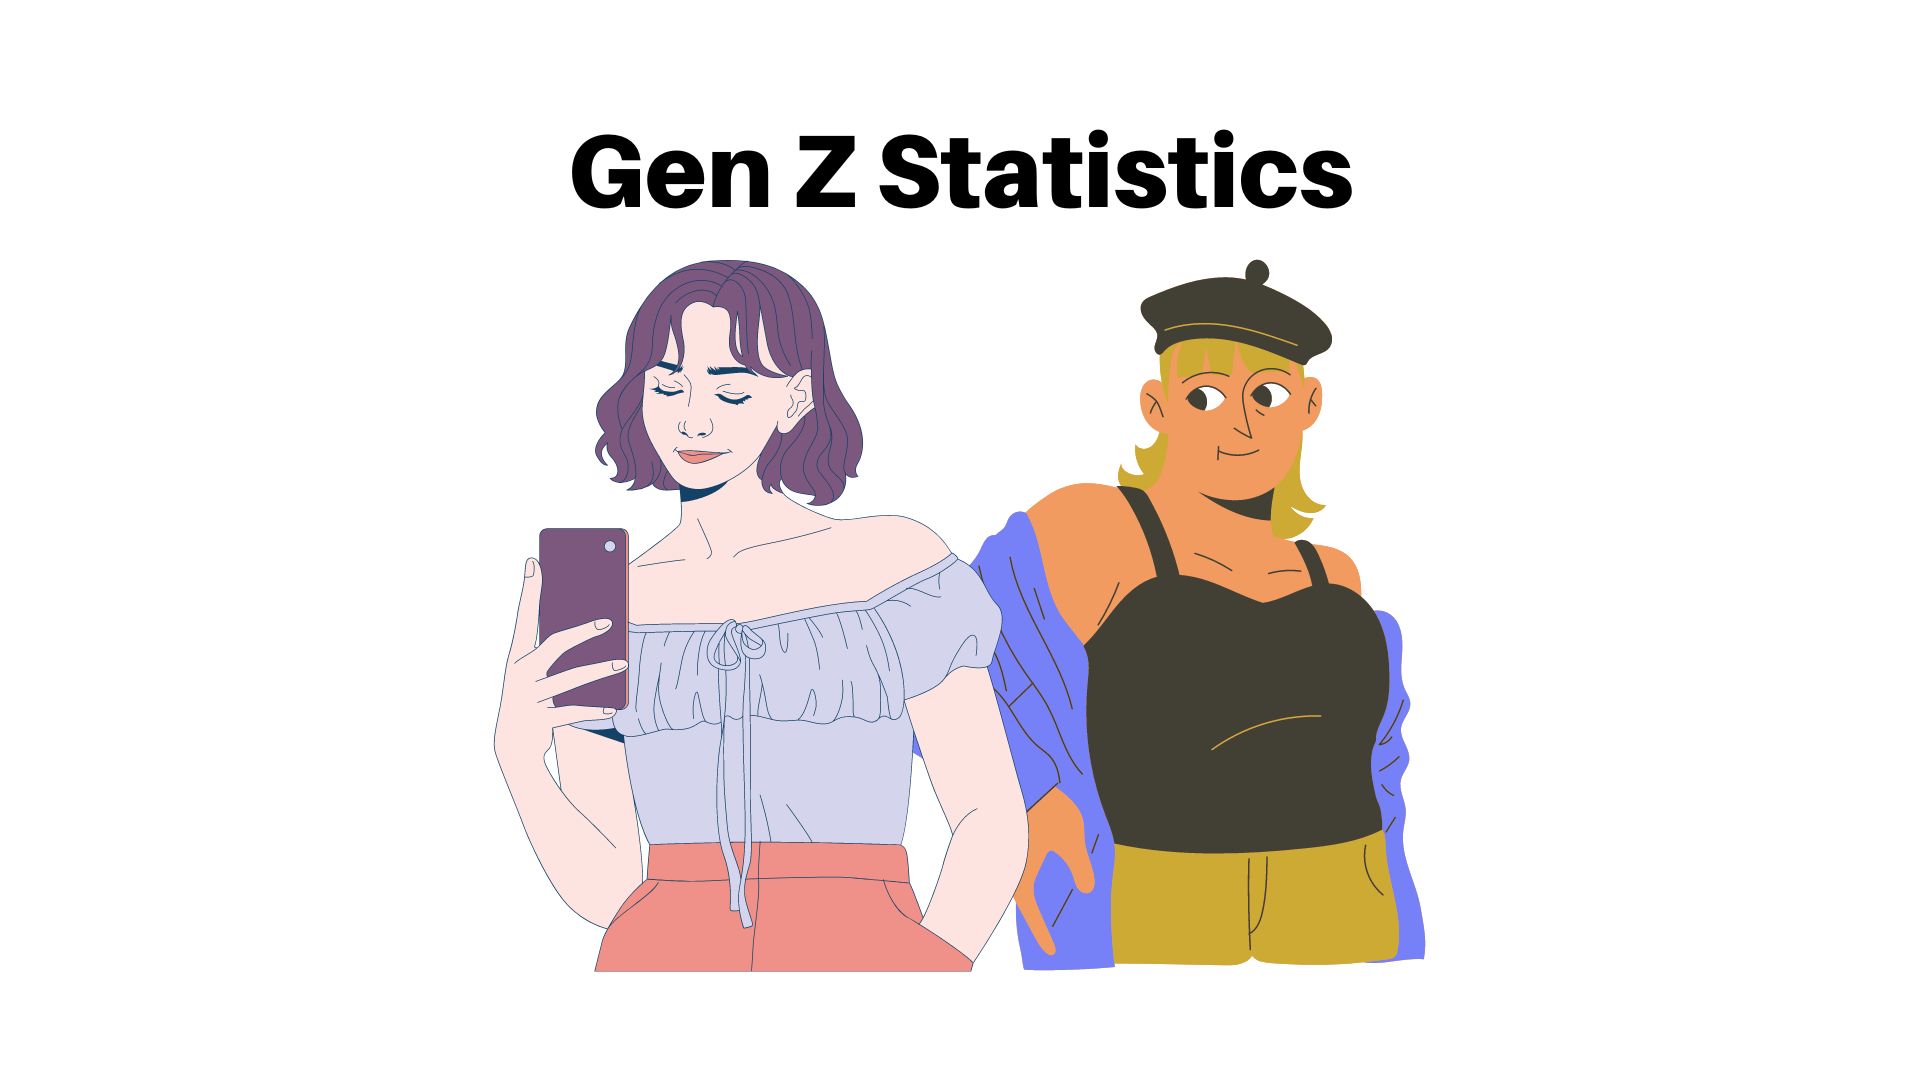 Gen Z Statistics – By Demographics, Advertising, Social Media, Food Consumption, Weekly Media Consumption and Purchase Habits